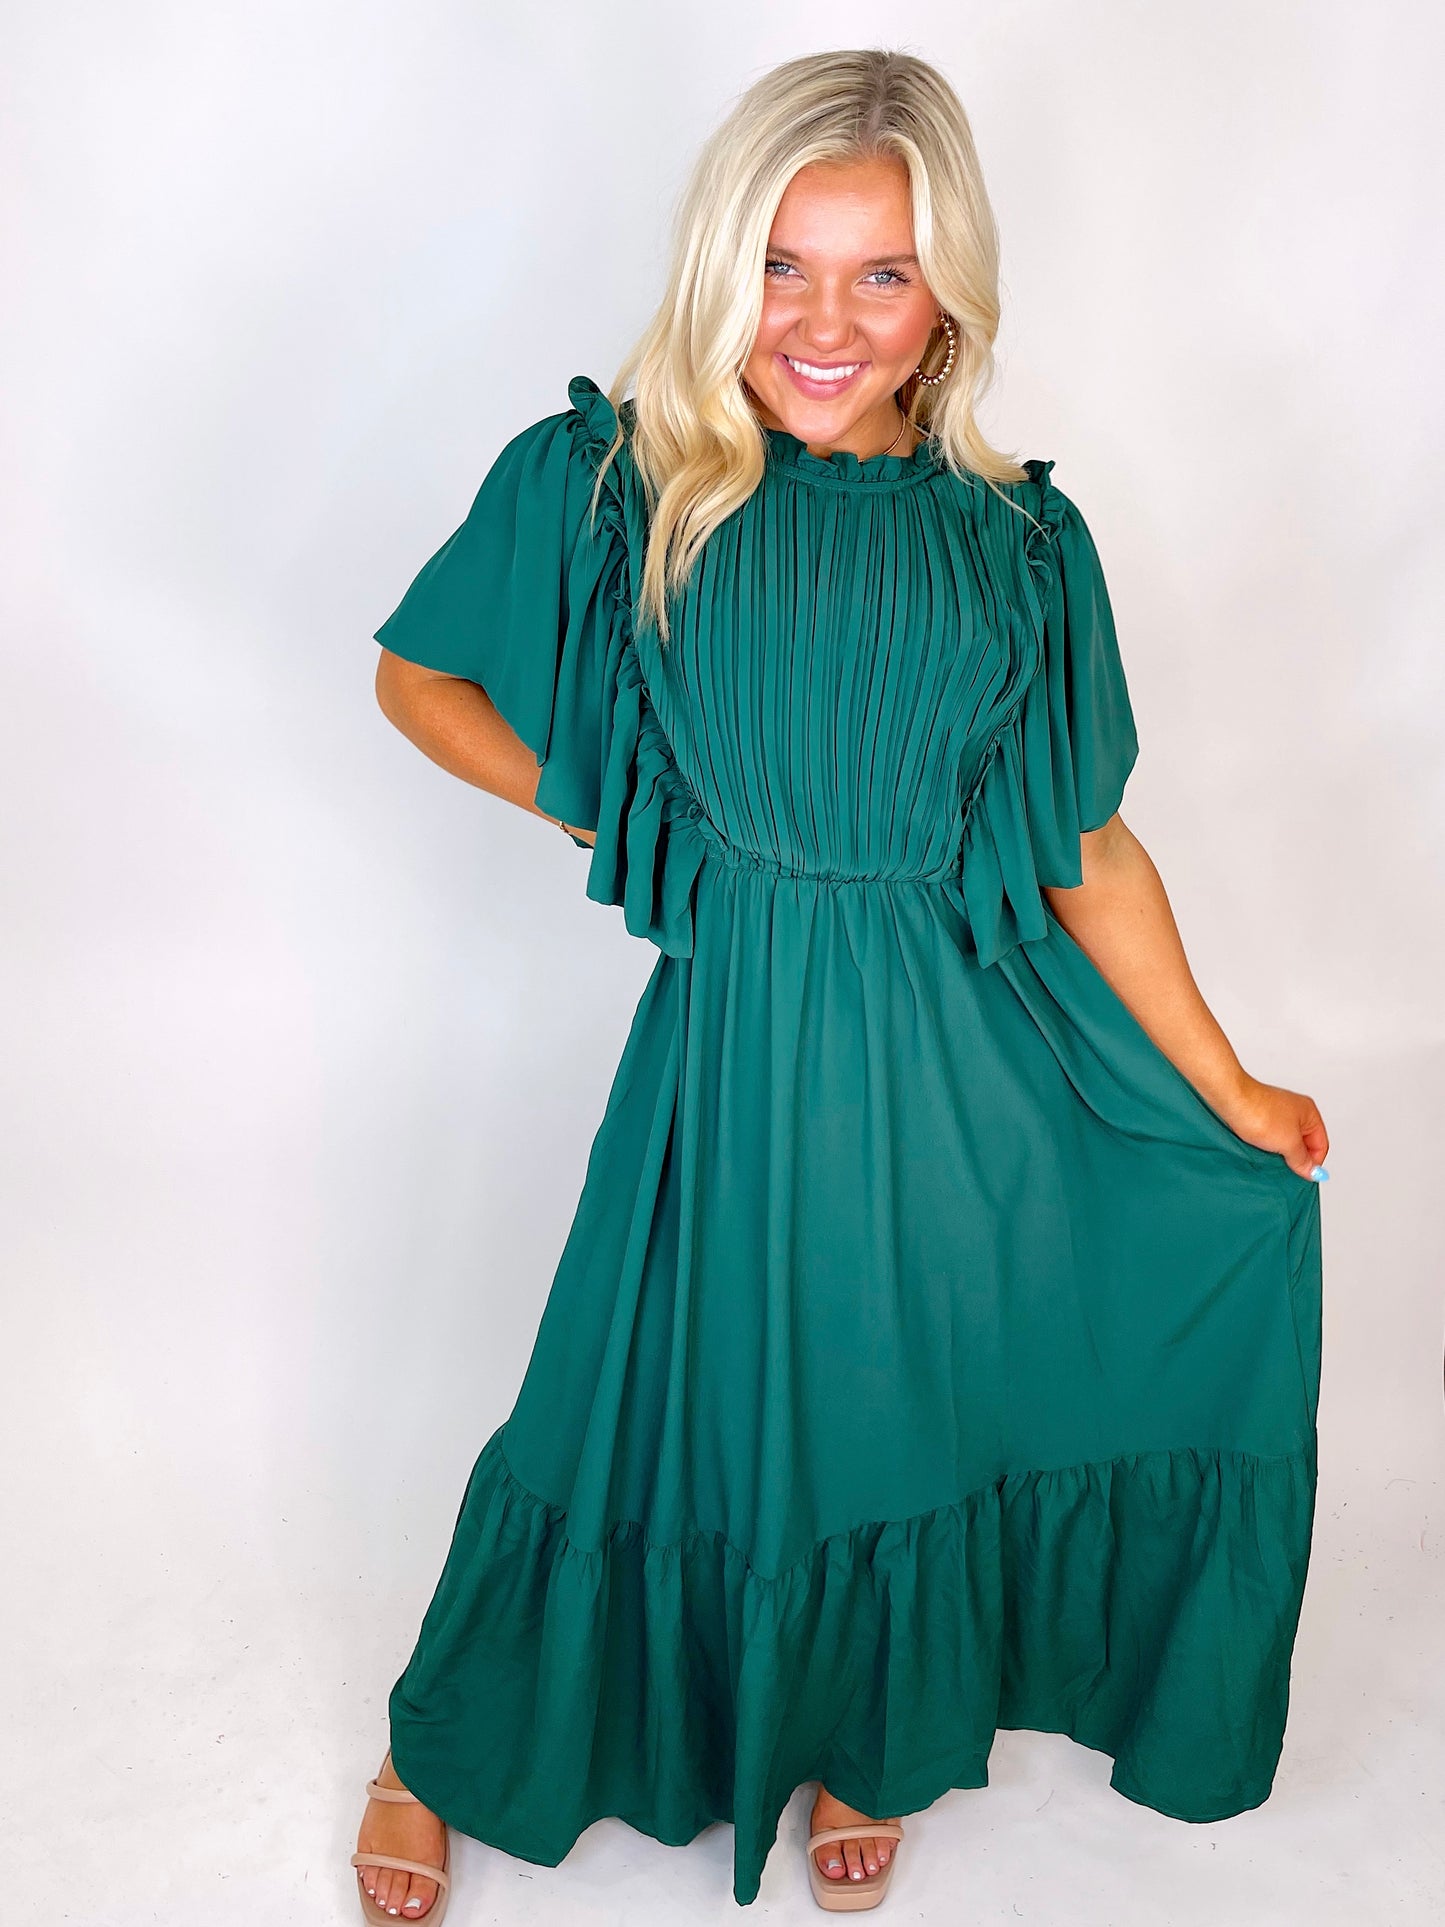 The Vivianne Dress-Maxi Dress-Entro-The Village Shoppe, Women’s Fashion Boutique, Shop Online and In Store - Located in Muscle Shoals, AL.